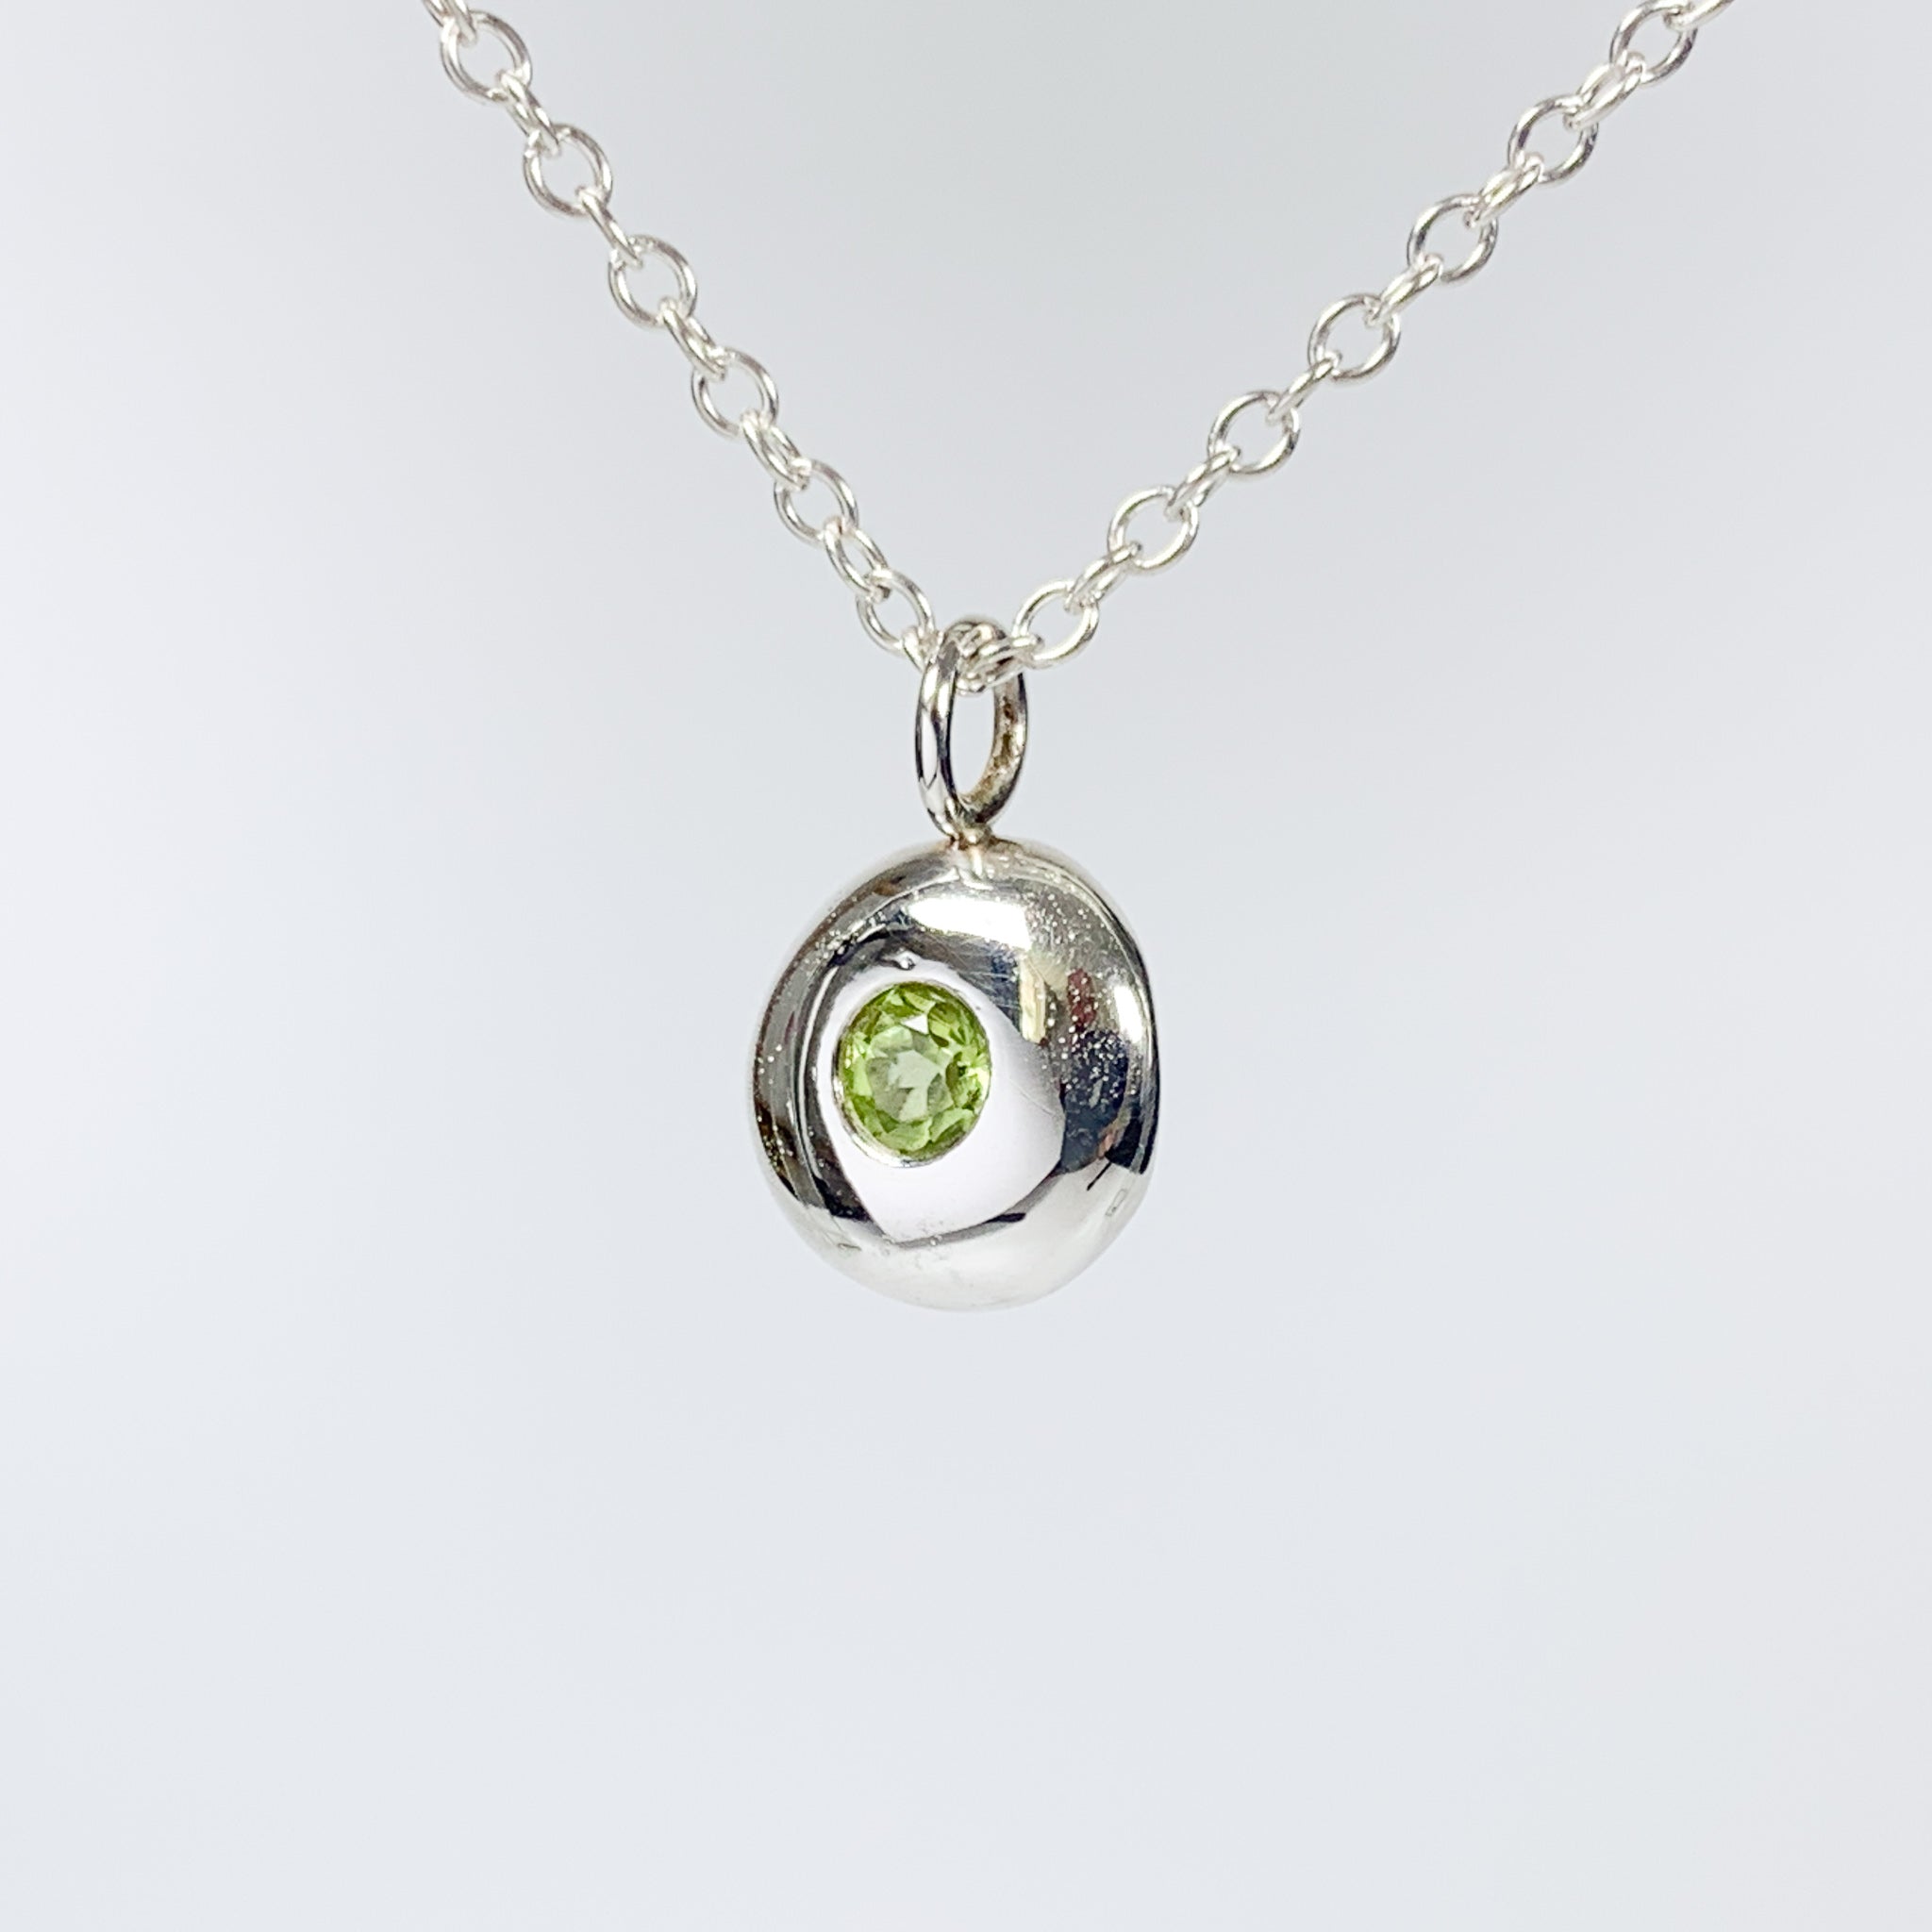 Pebble Charm Sterling Silver Peridot Pendant Necklace